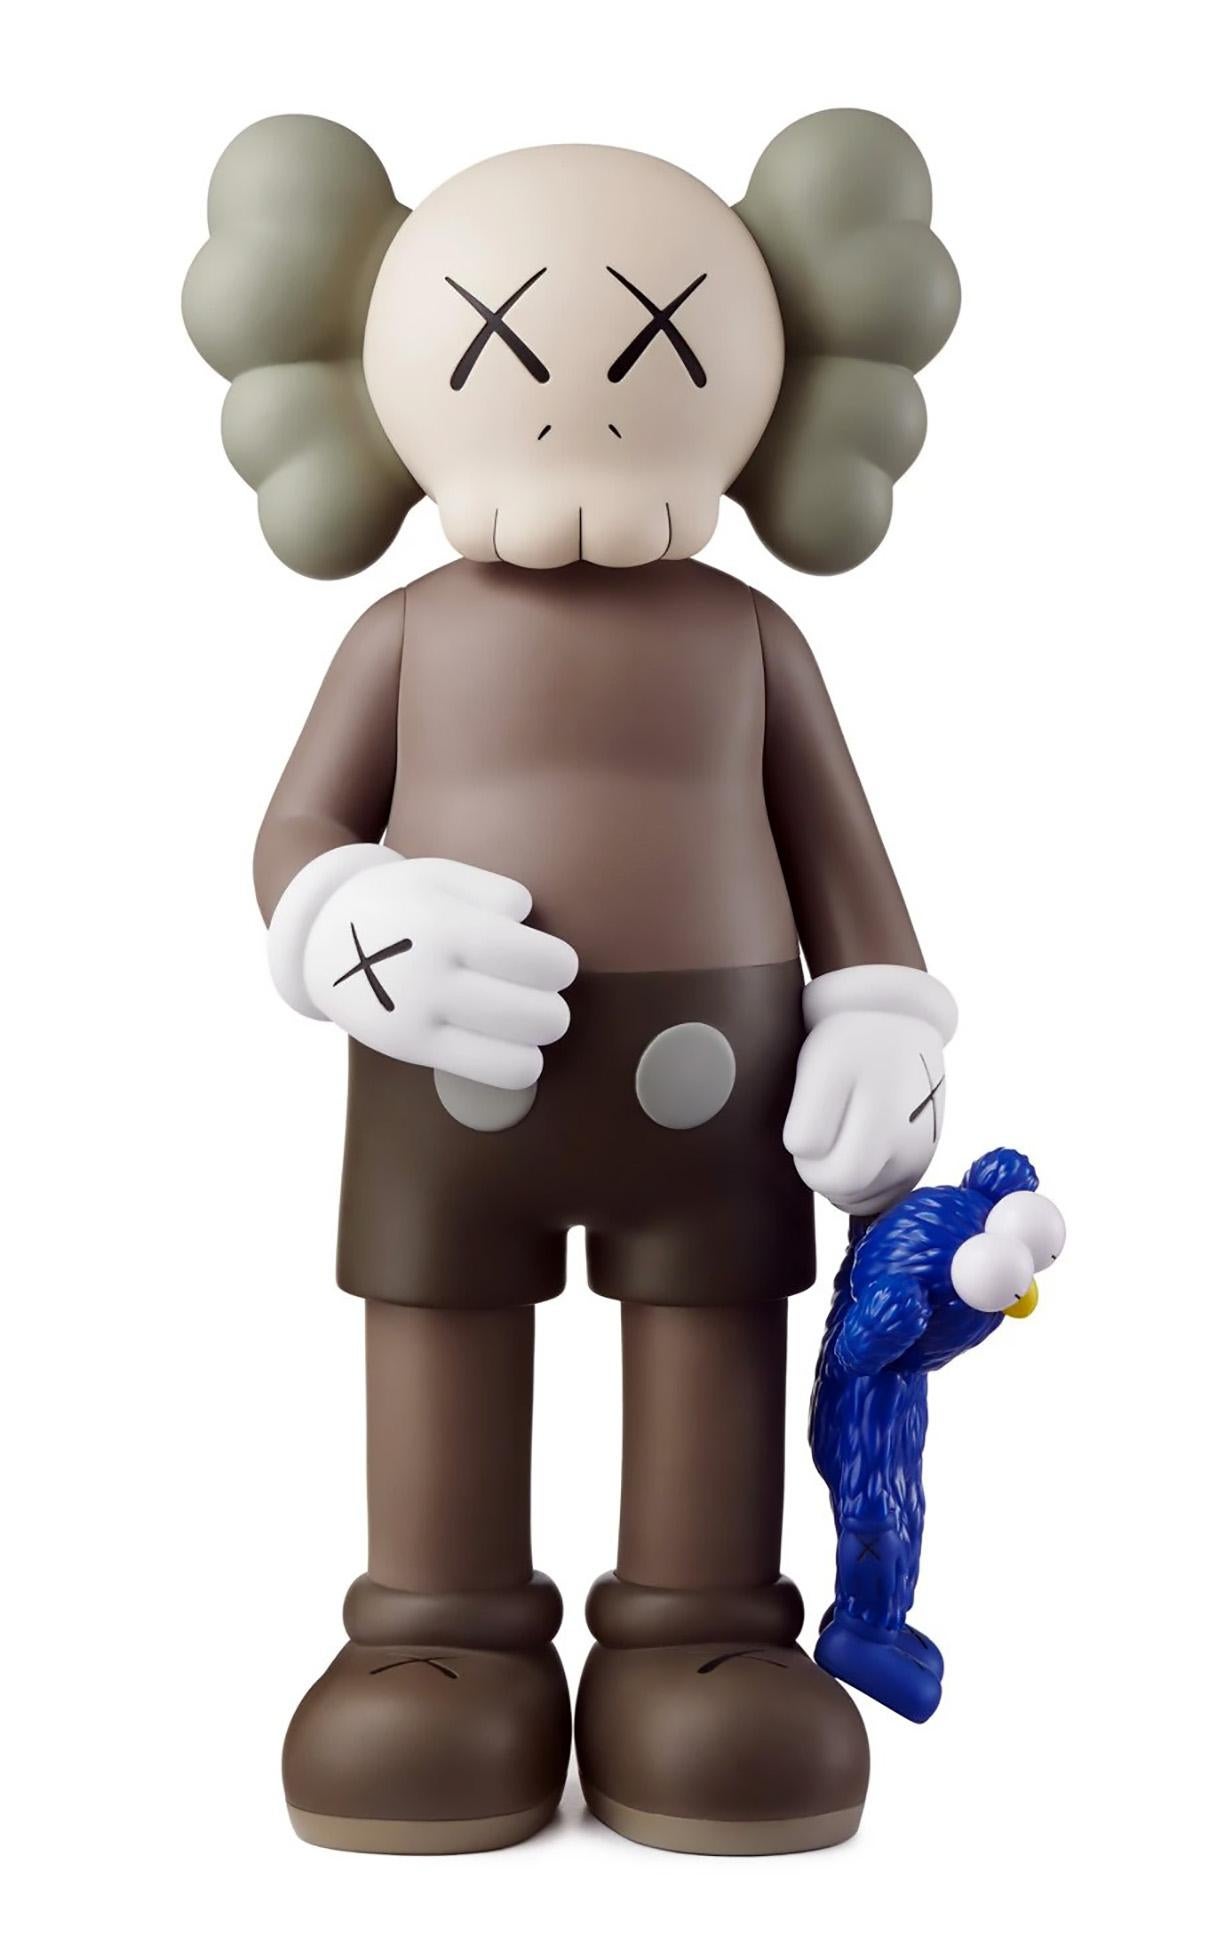 KAWS SHARE: Set of 2, each new & unopened in its original packaging. 
KAWS SHARE first appeared in 'BLACKOUT' – the first London solo exhibition by KAWS (Skarstedt London 2019). In SHARE, KAWS uses two of his characters to convey opposing human